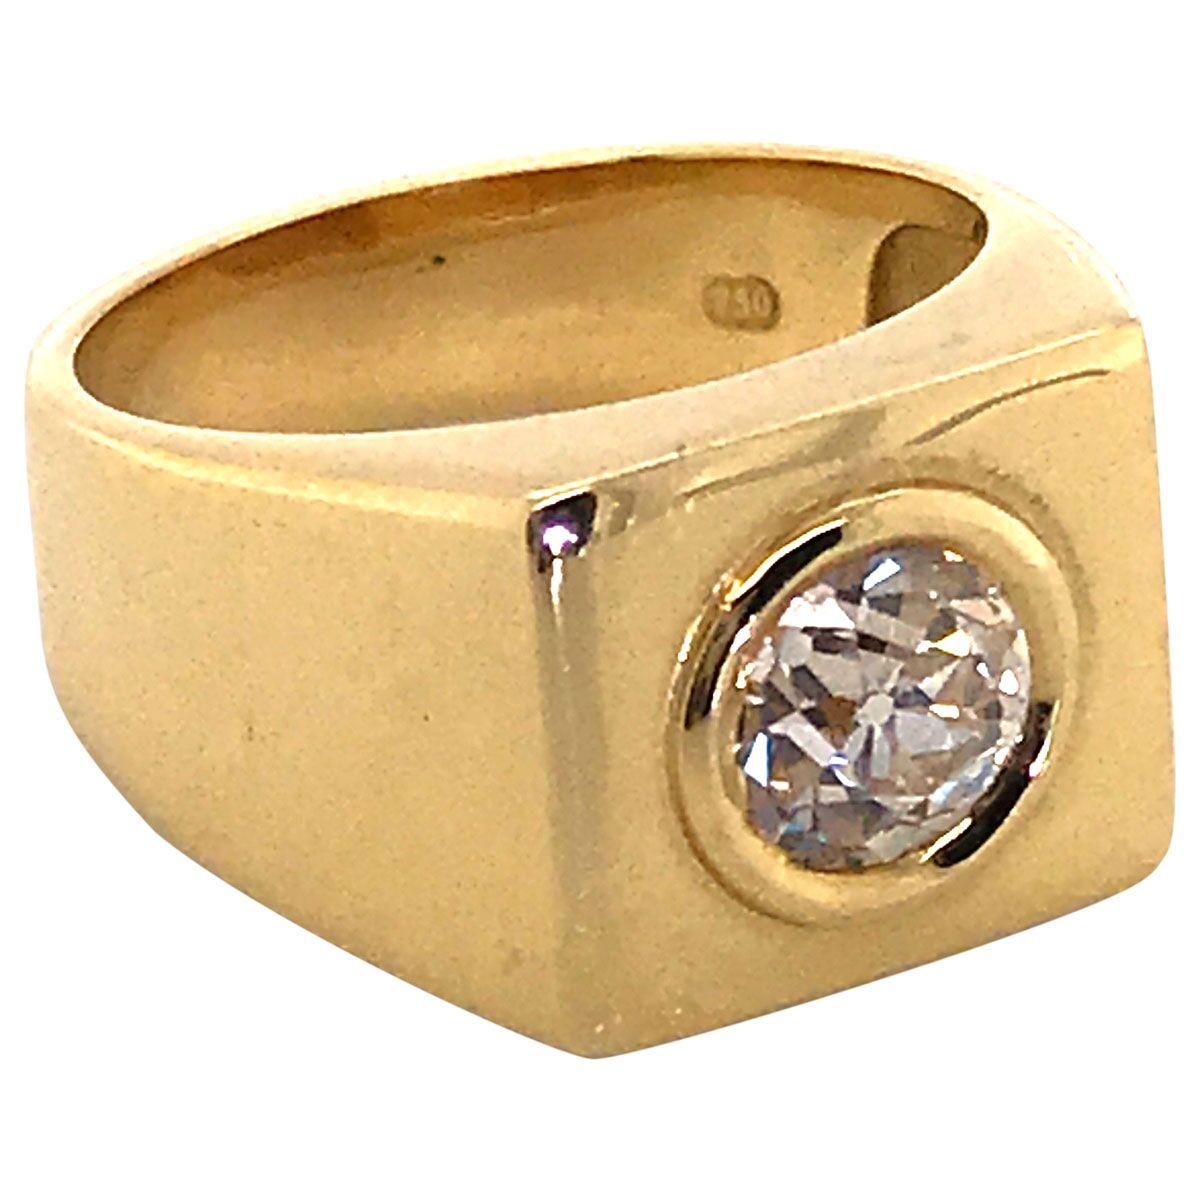 Pinky rings are sought after at the moment, showcasing it on one hand is classic and so stylish. This ring is perfect for that, it's bold and adds punch. Fashioned from 18k yellow gold the square shape is strong and bordering on a masculine look, so